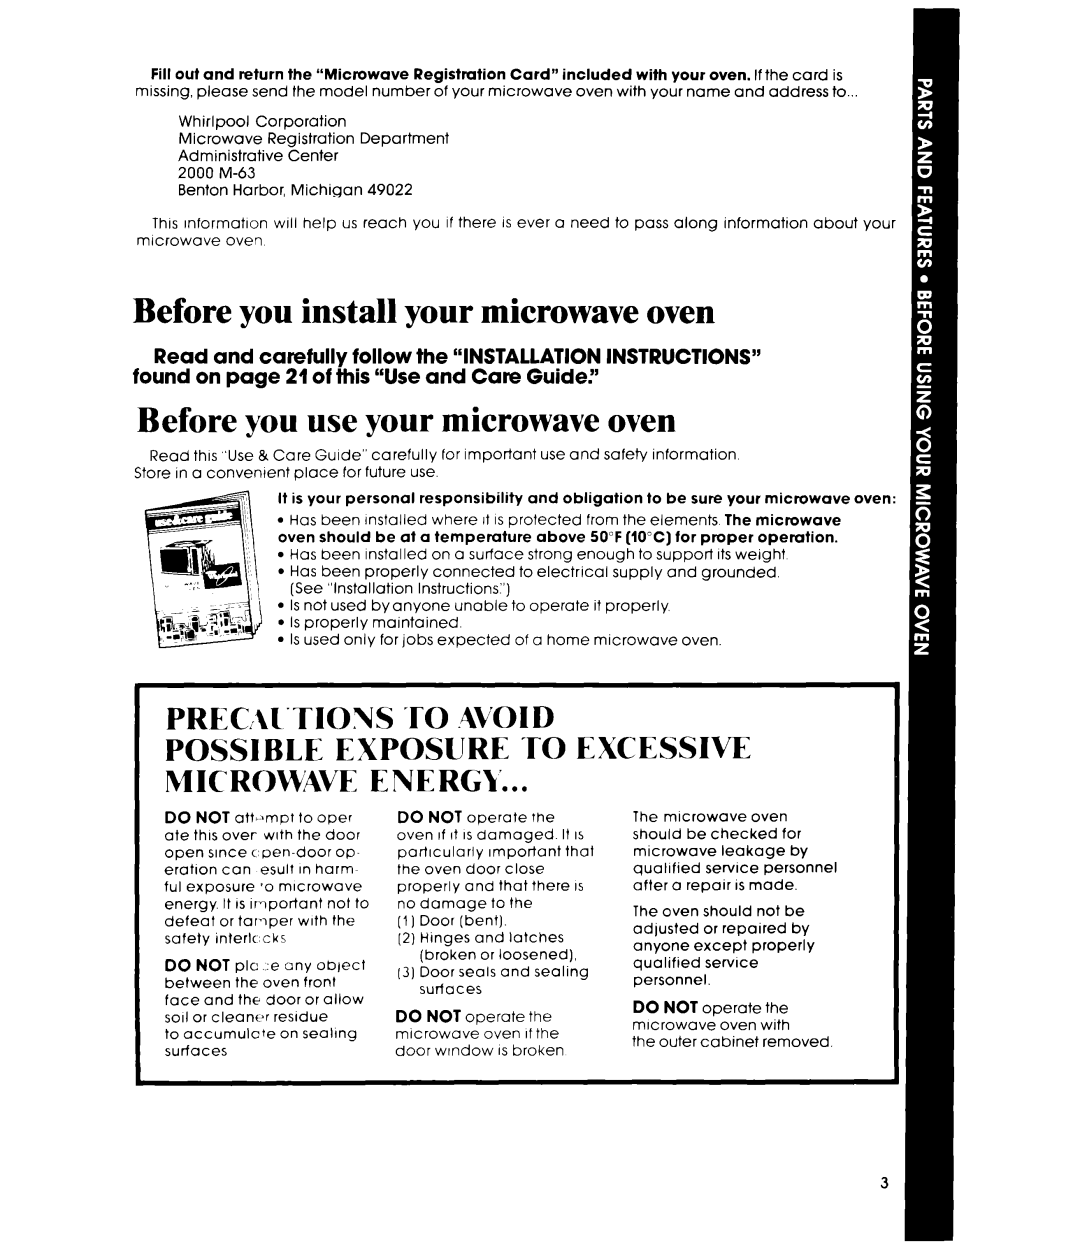 Whirlpool MW8600XS manual Before you install your microwave oven, Before you use your microwave oven, PRECM.TIONS TO .4VOID 